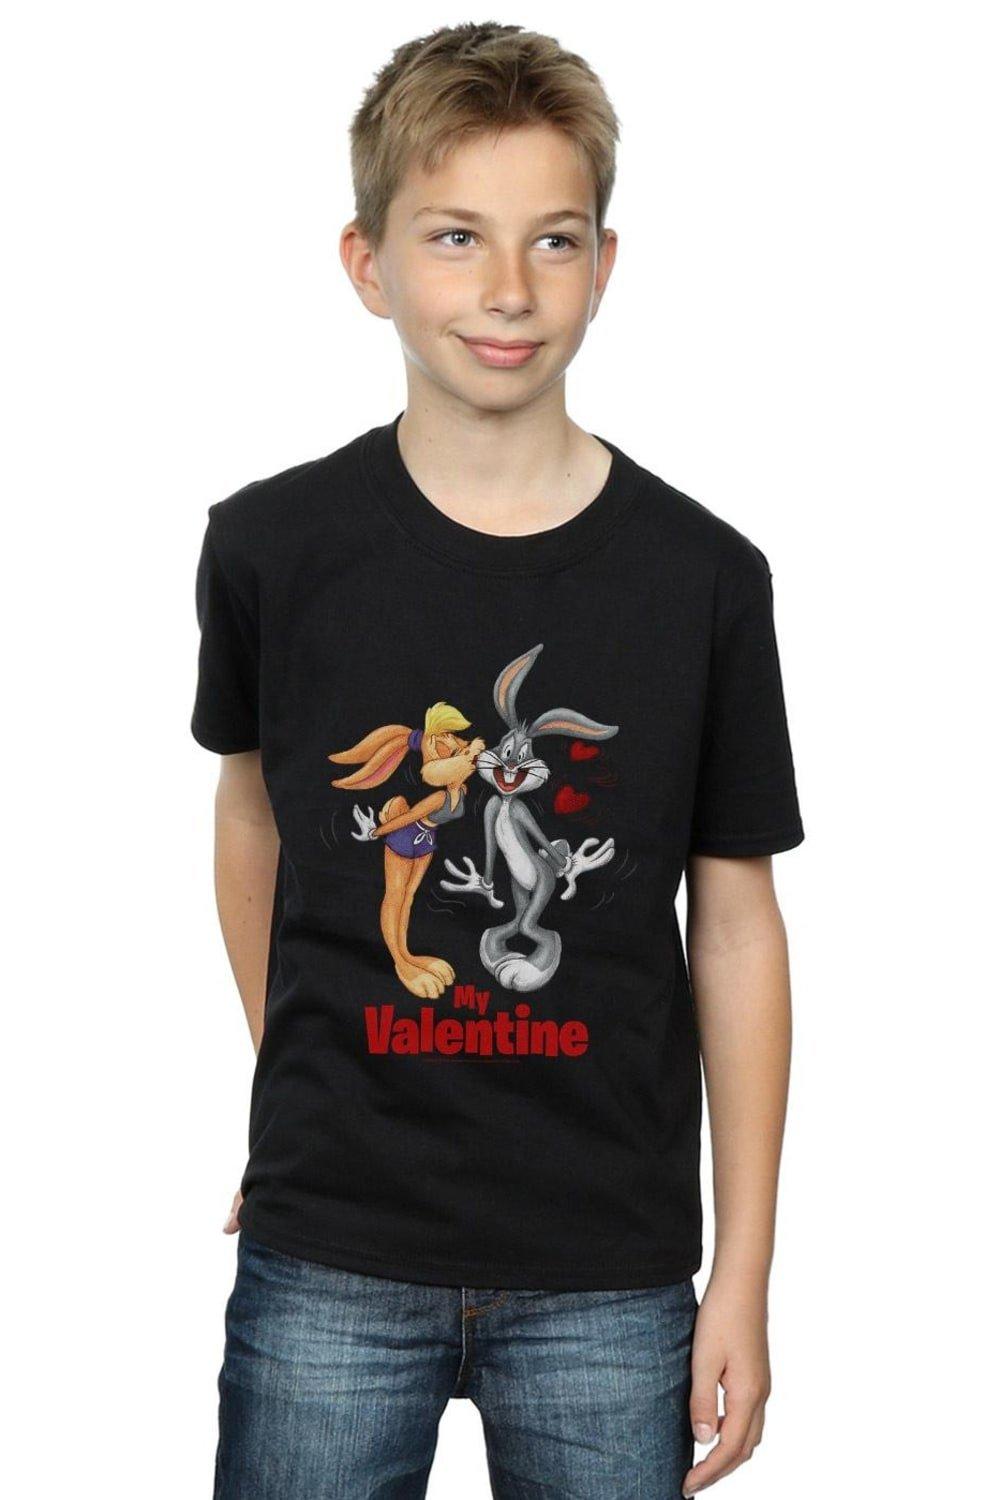 Bugs Bunny And Lola Valentine’s Day T-Shirt